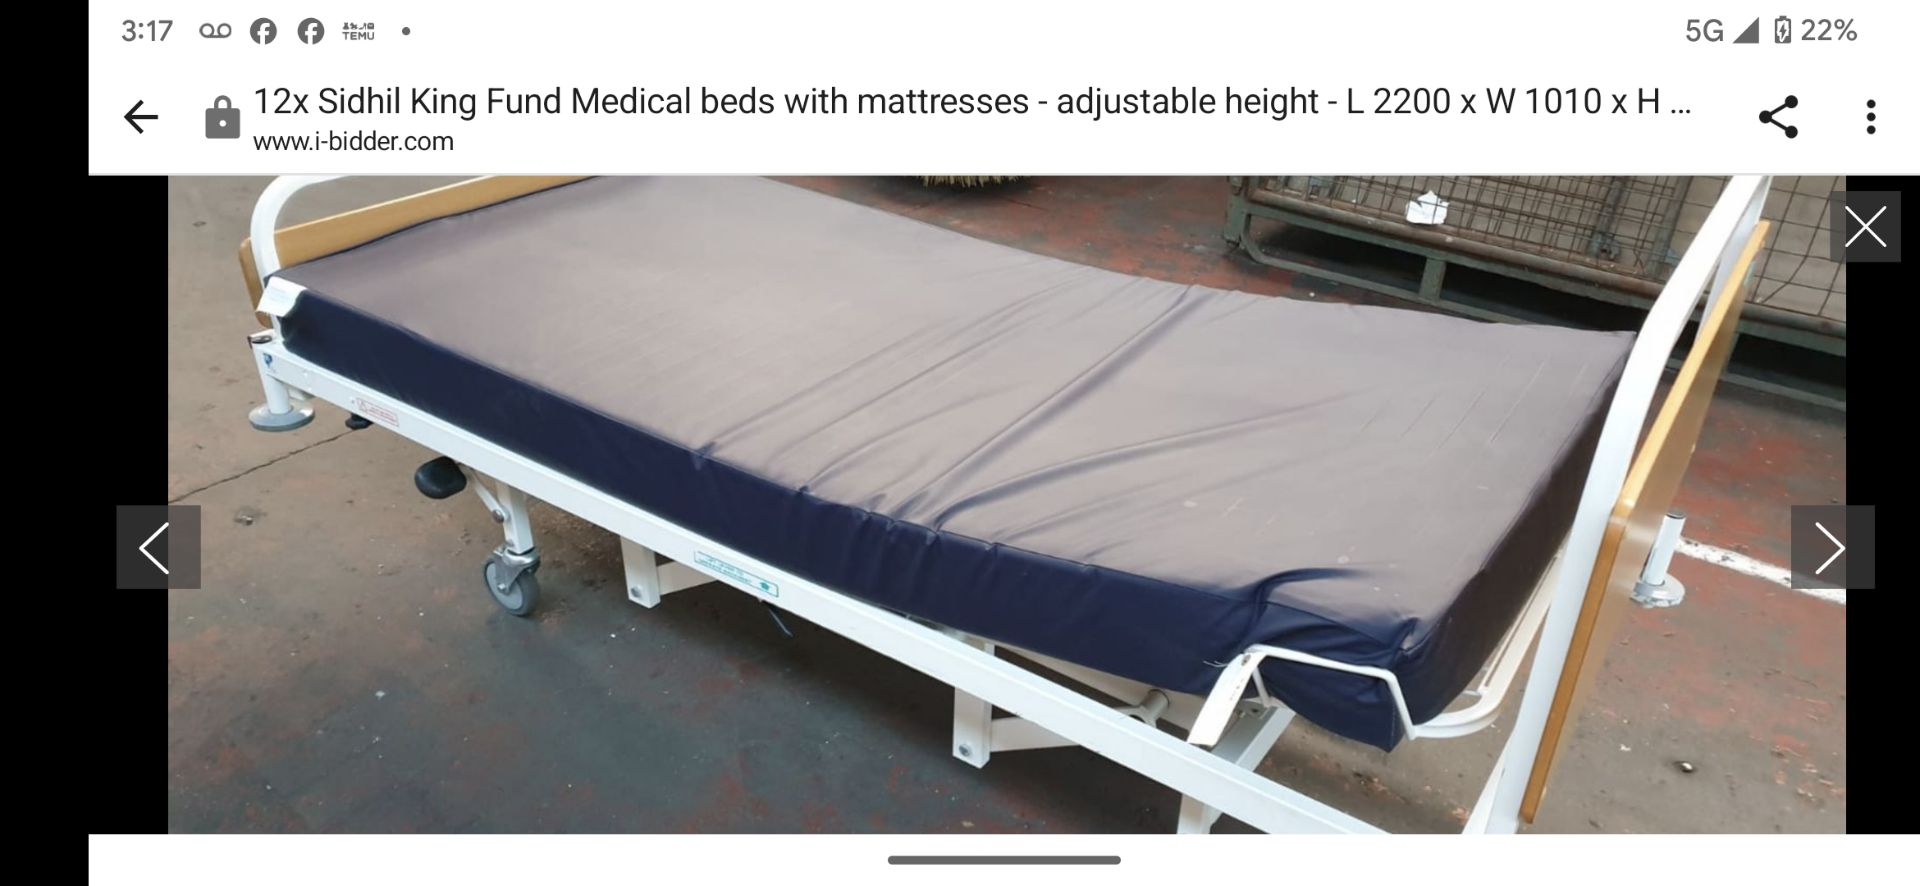 1 x Sidhil Kings Fund Hydraulic Hospital Bed With Mattress - Image 7 of 7